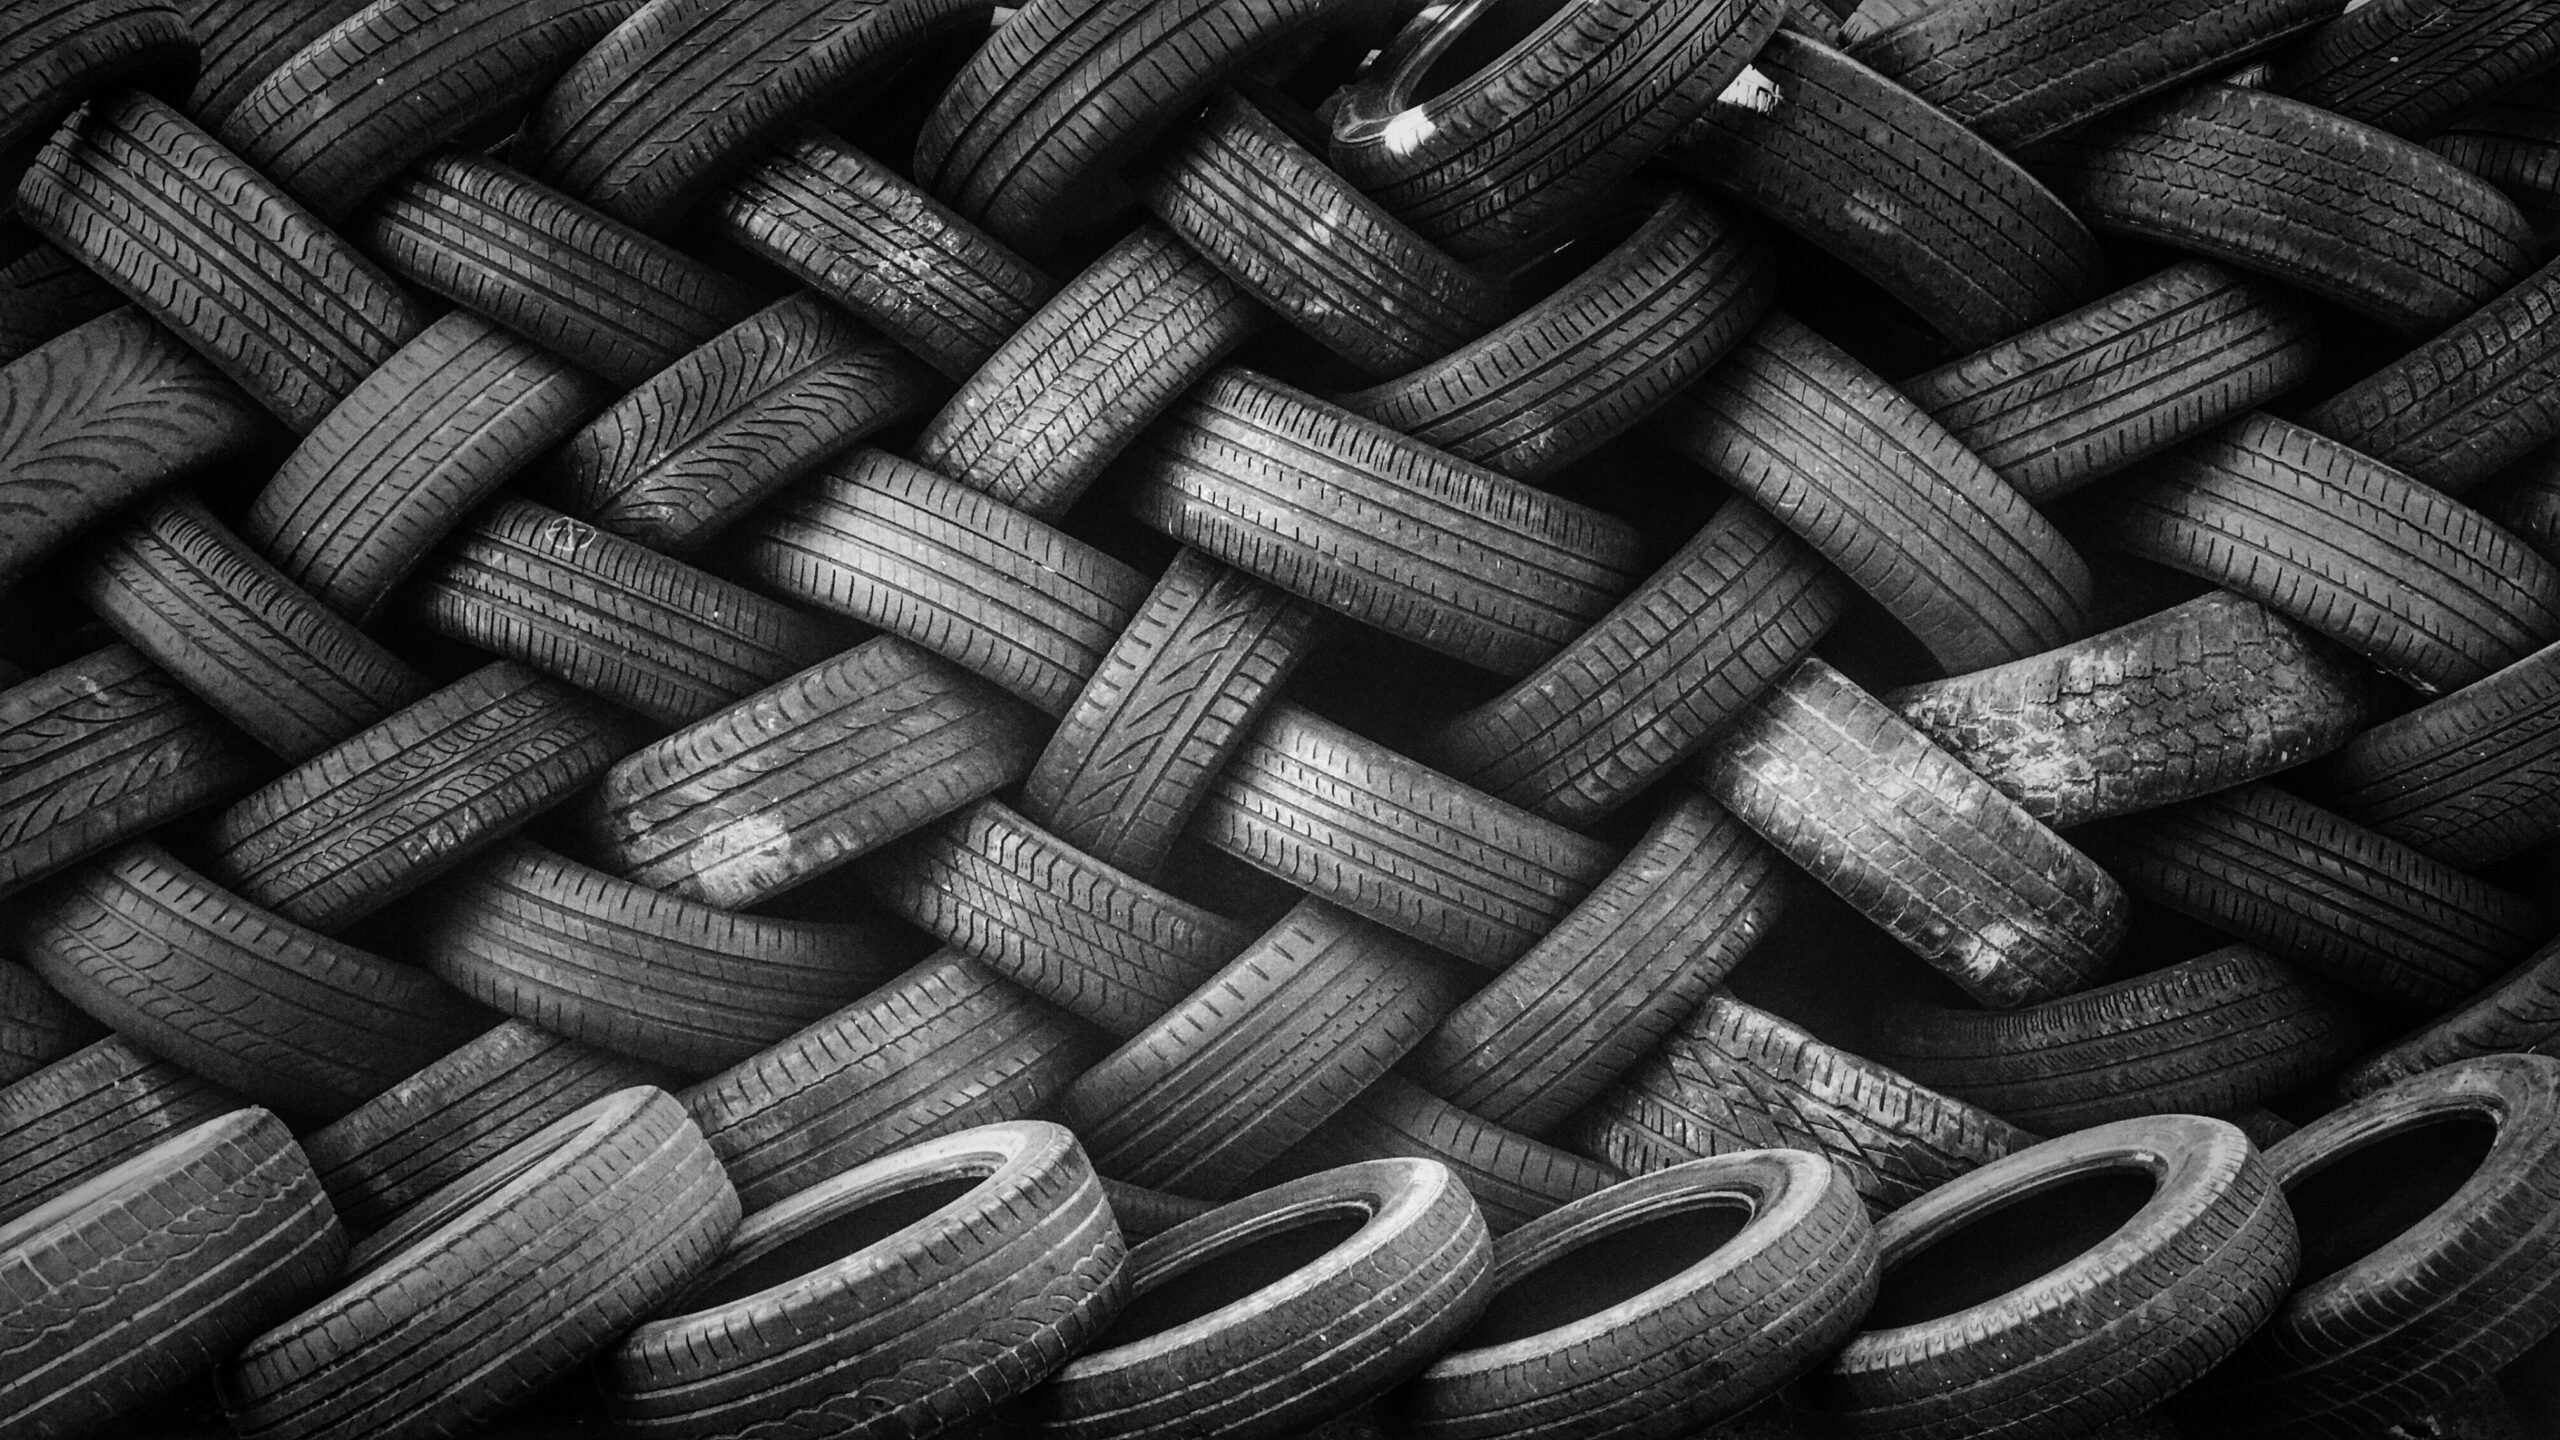 End-of-life Tyres: Should They be Recycled or Dumped? See What Europe has to Say